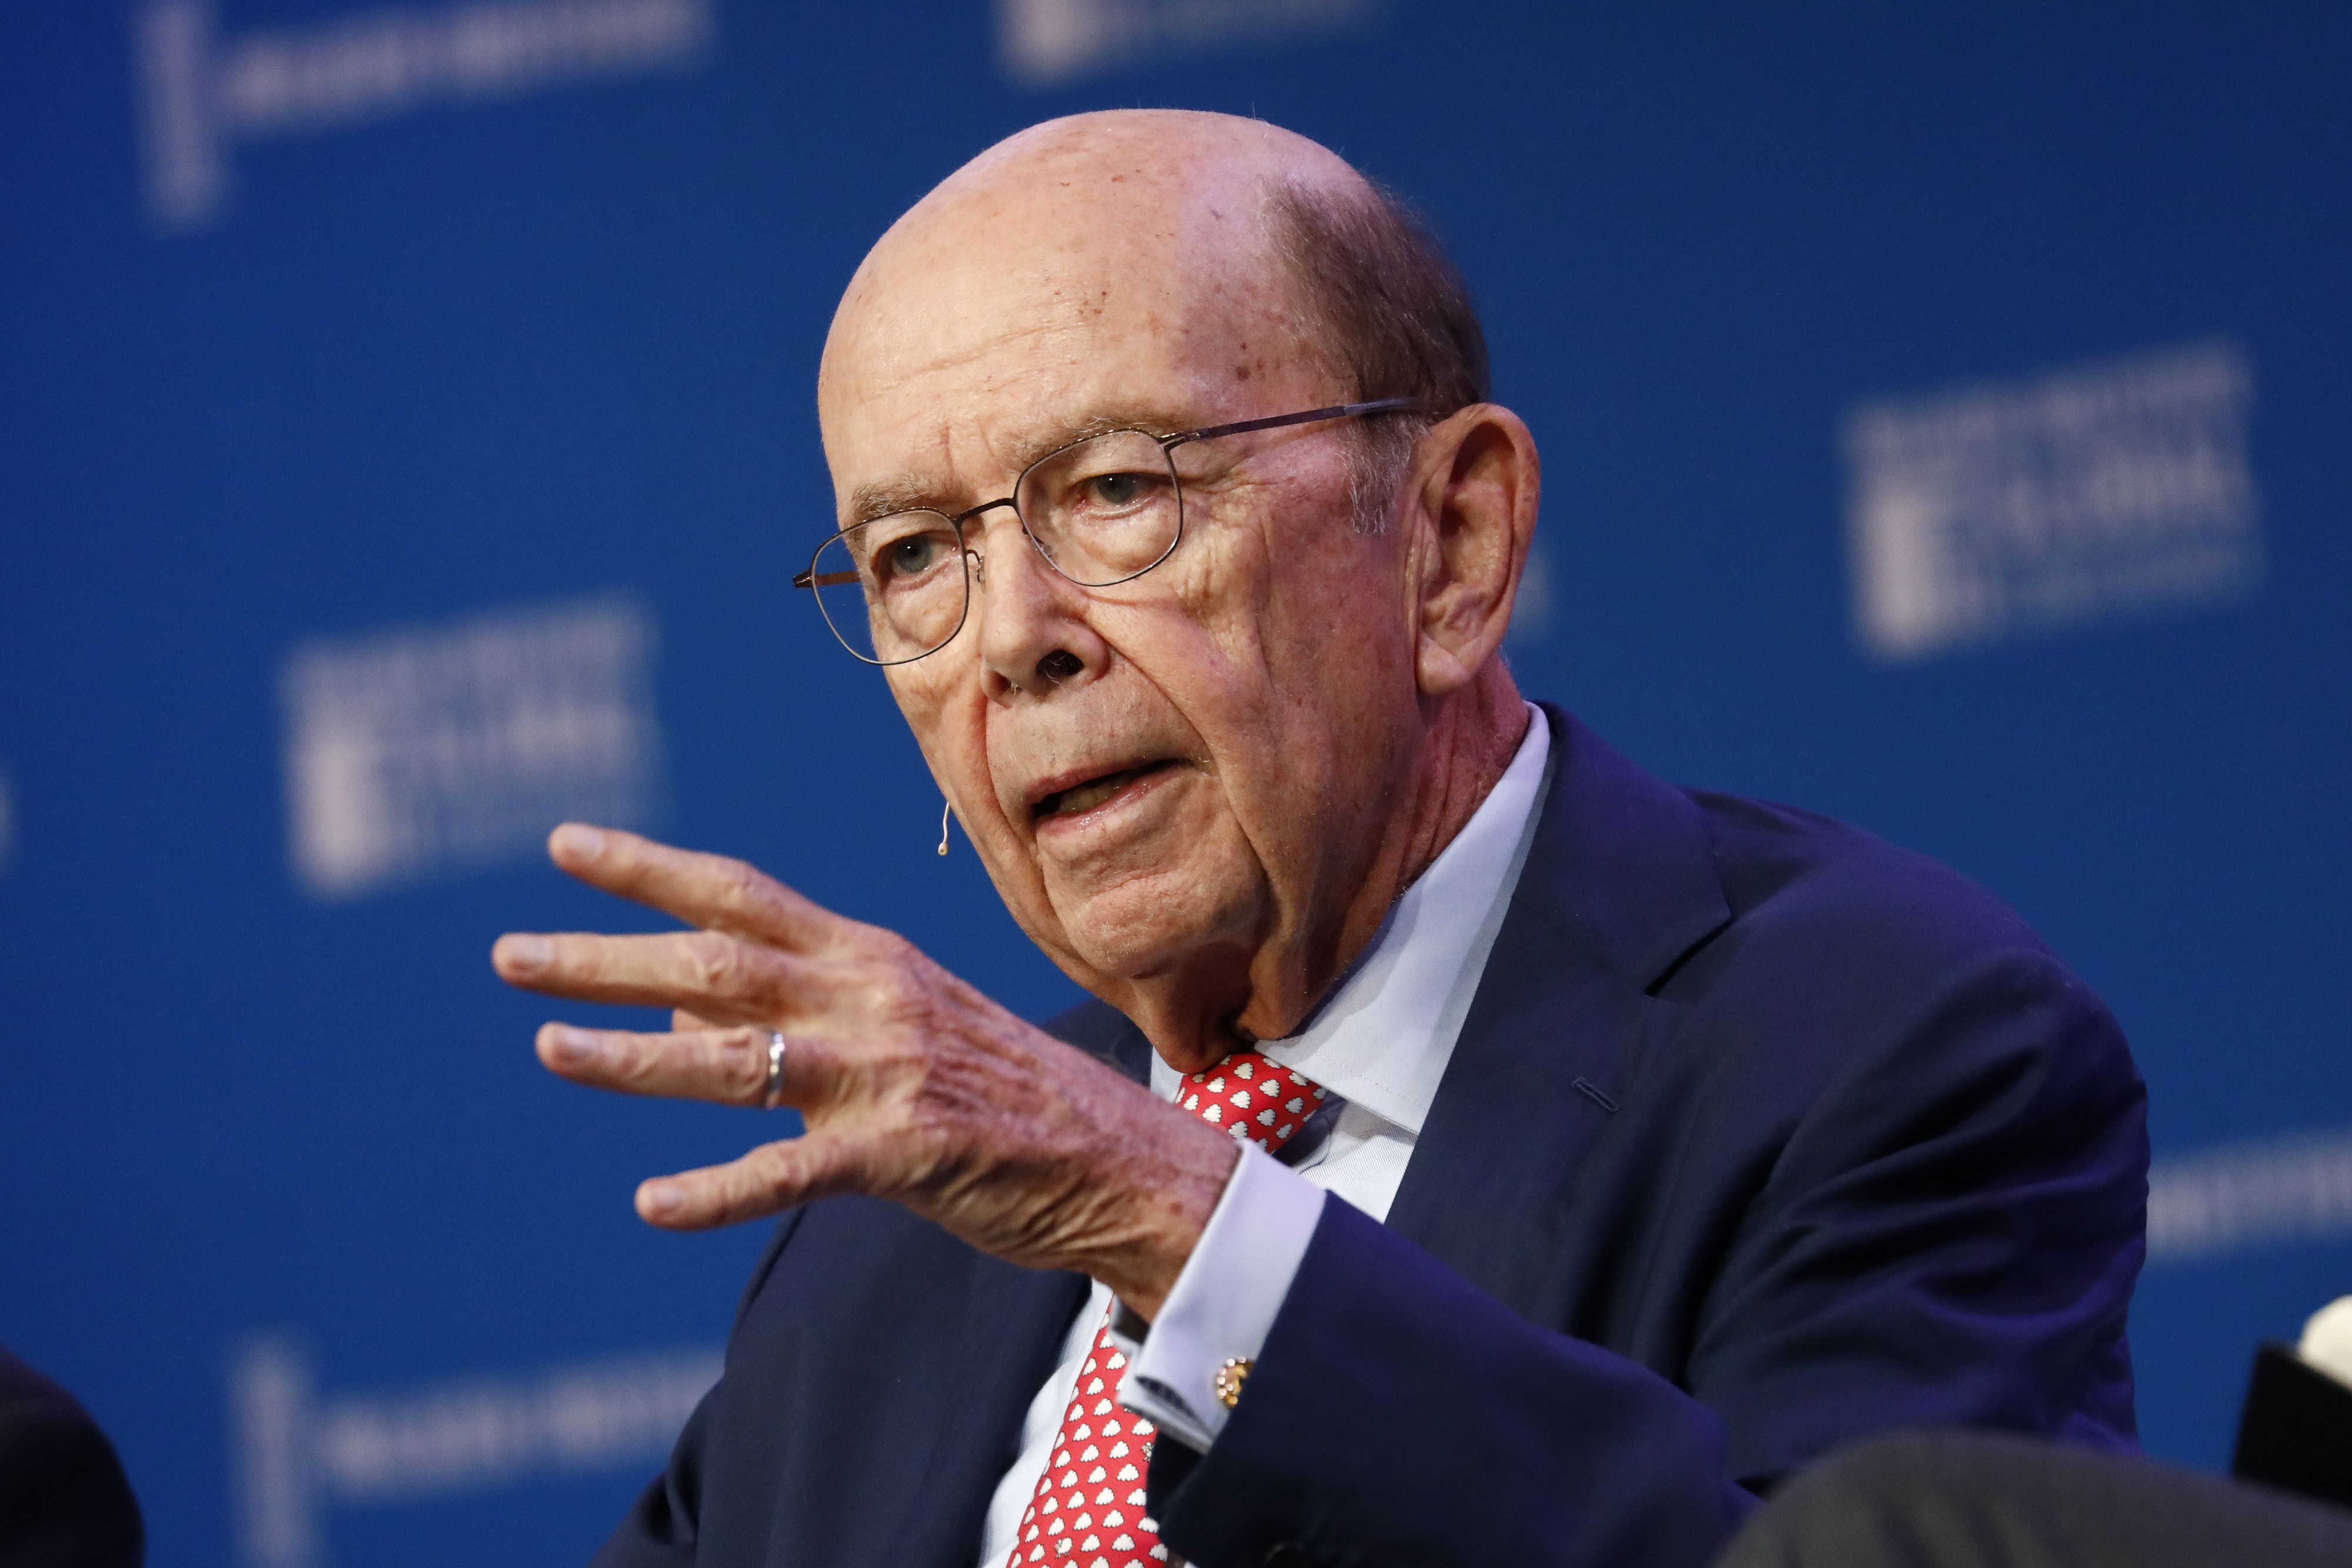 US Commerce Secretary Wilbur Ross said an anticipated meeting between Donald Trump and Xi Jinping at the G20 summit could produce “some sort of agreement” but no “definitive” deal. Photo: Bloomberg